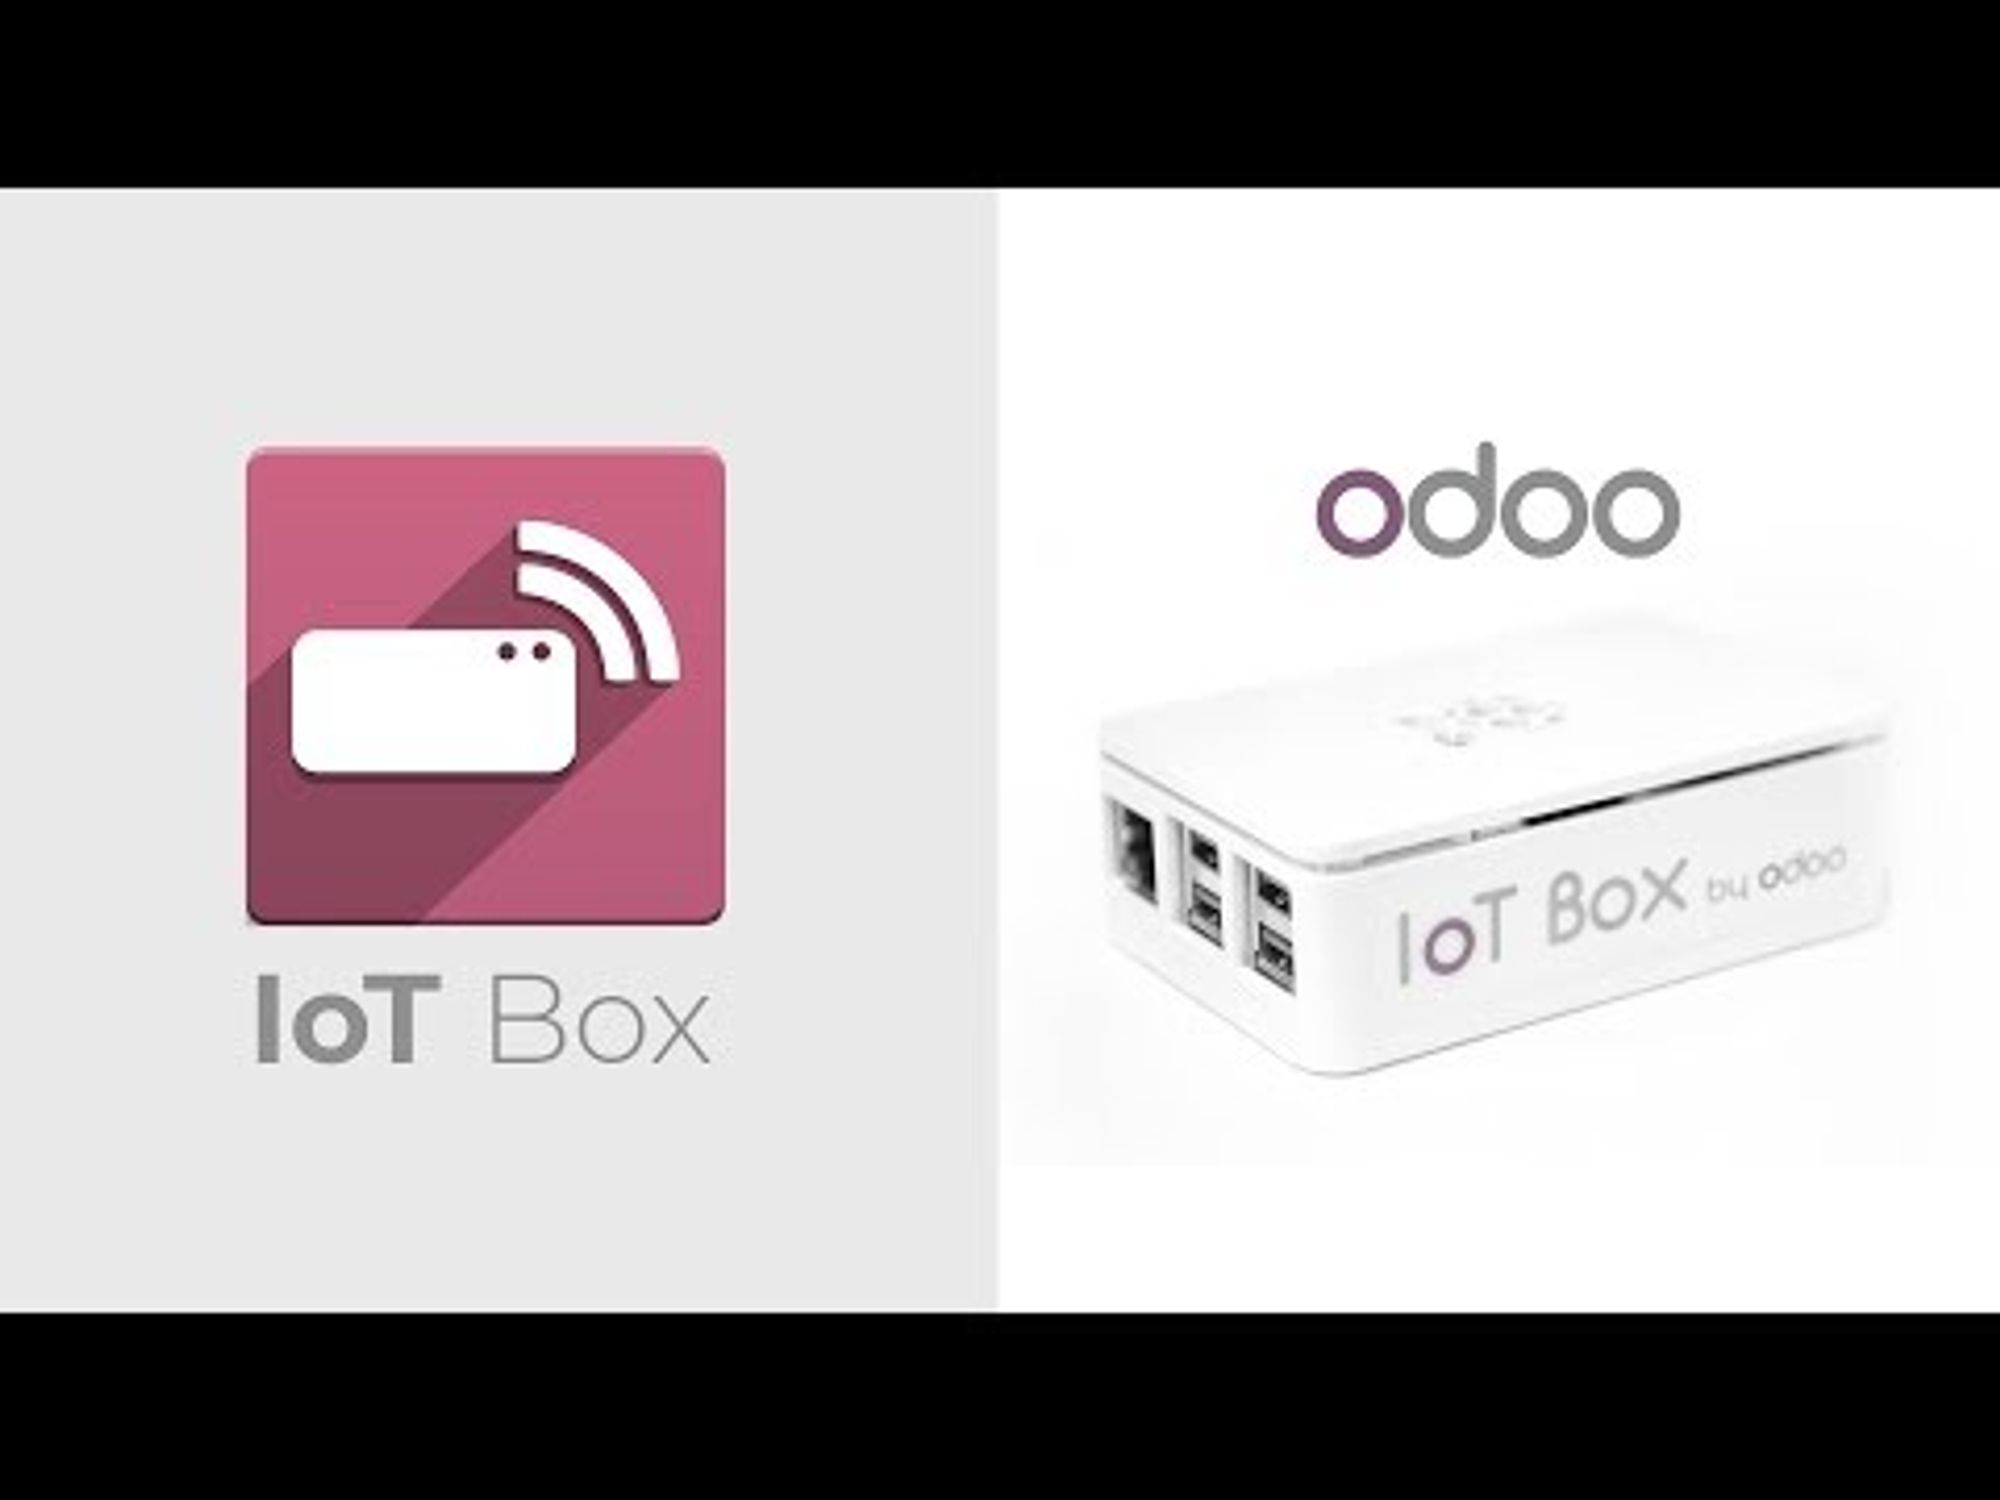 The Odoo IoT Box - Revolutionizing Your Manufacturing Process